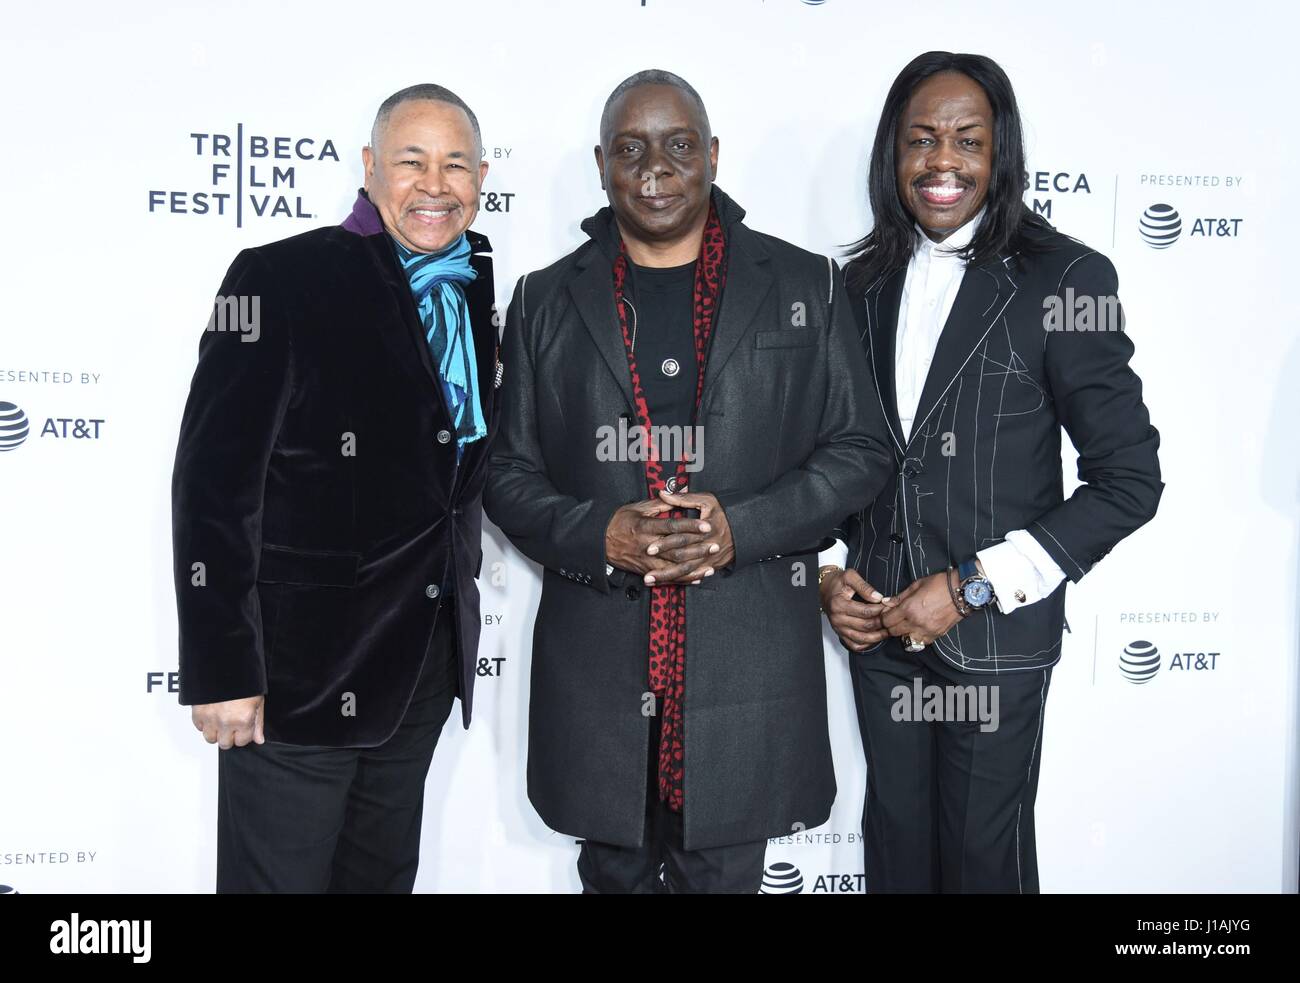 New York, NY, USA. 19th Apr, 2017. Earth Wind and Fire, Ralph Johnson, Philip Bailey, Verdine White at arrivals for CLIVE DAVIS: THE SOUNDTRACK OF OUR LIVES Opening Night Premiere at the 2017 Tribeca Film Festival, Radio City Music Hall, New York, NY April 19, 2017. Credit: Derek Storm/Everett Collection/Alamy Live News Stock Photo